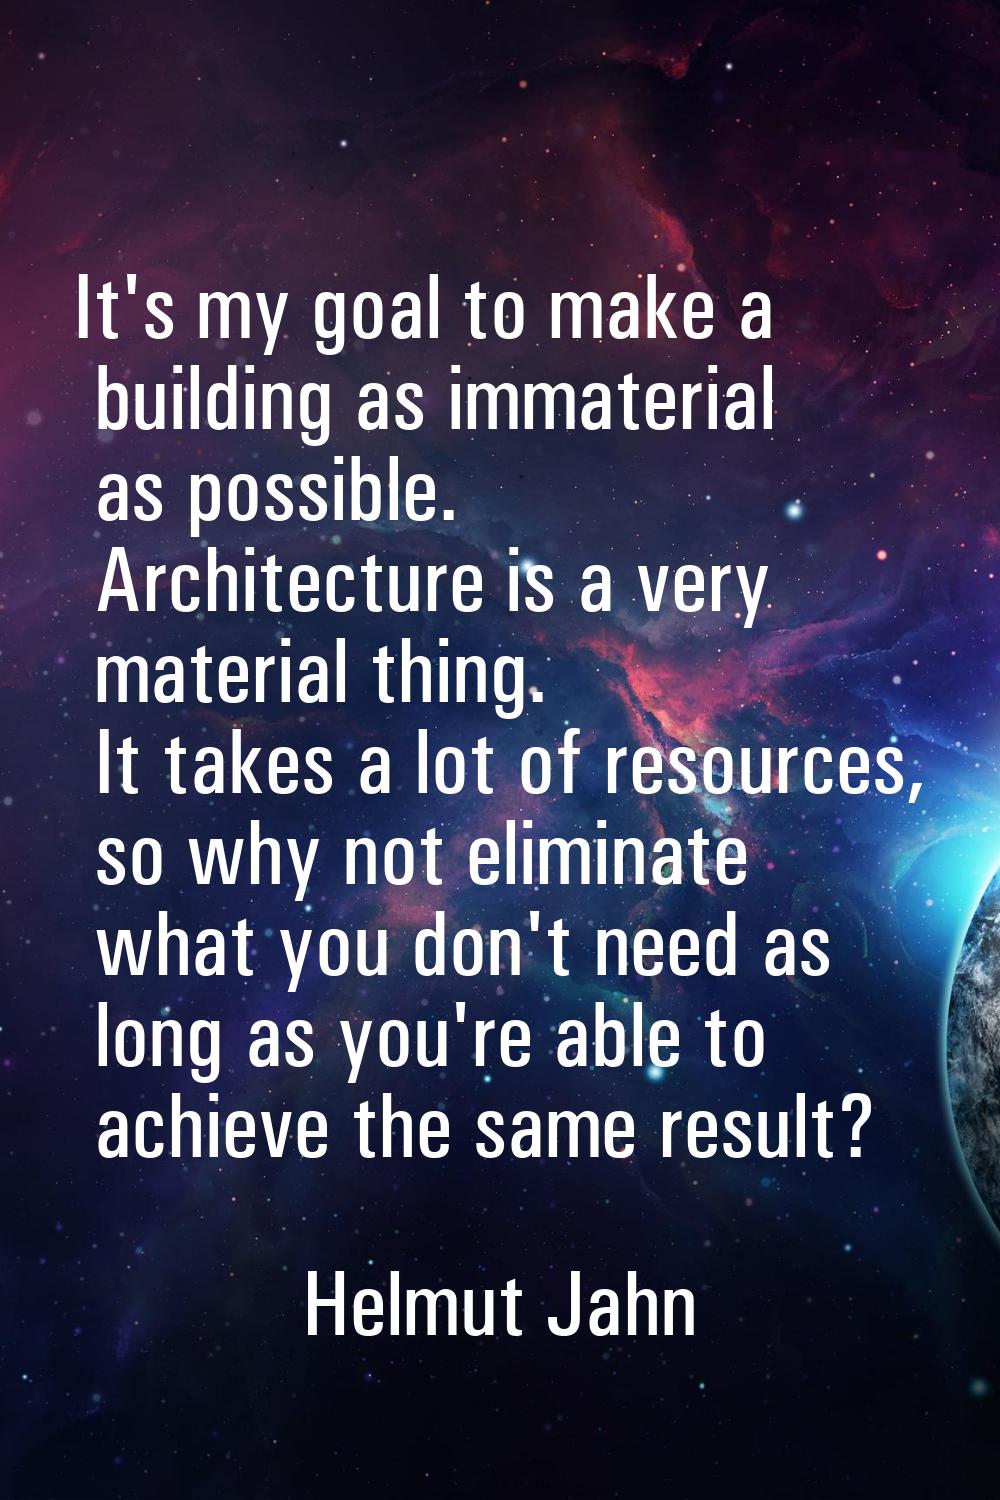 It's my goal to make a building as immaterial as possible. Architecture is a very material thing. I